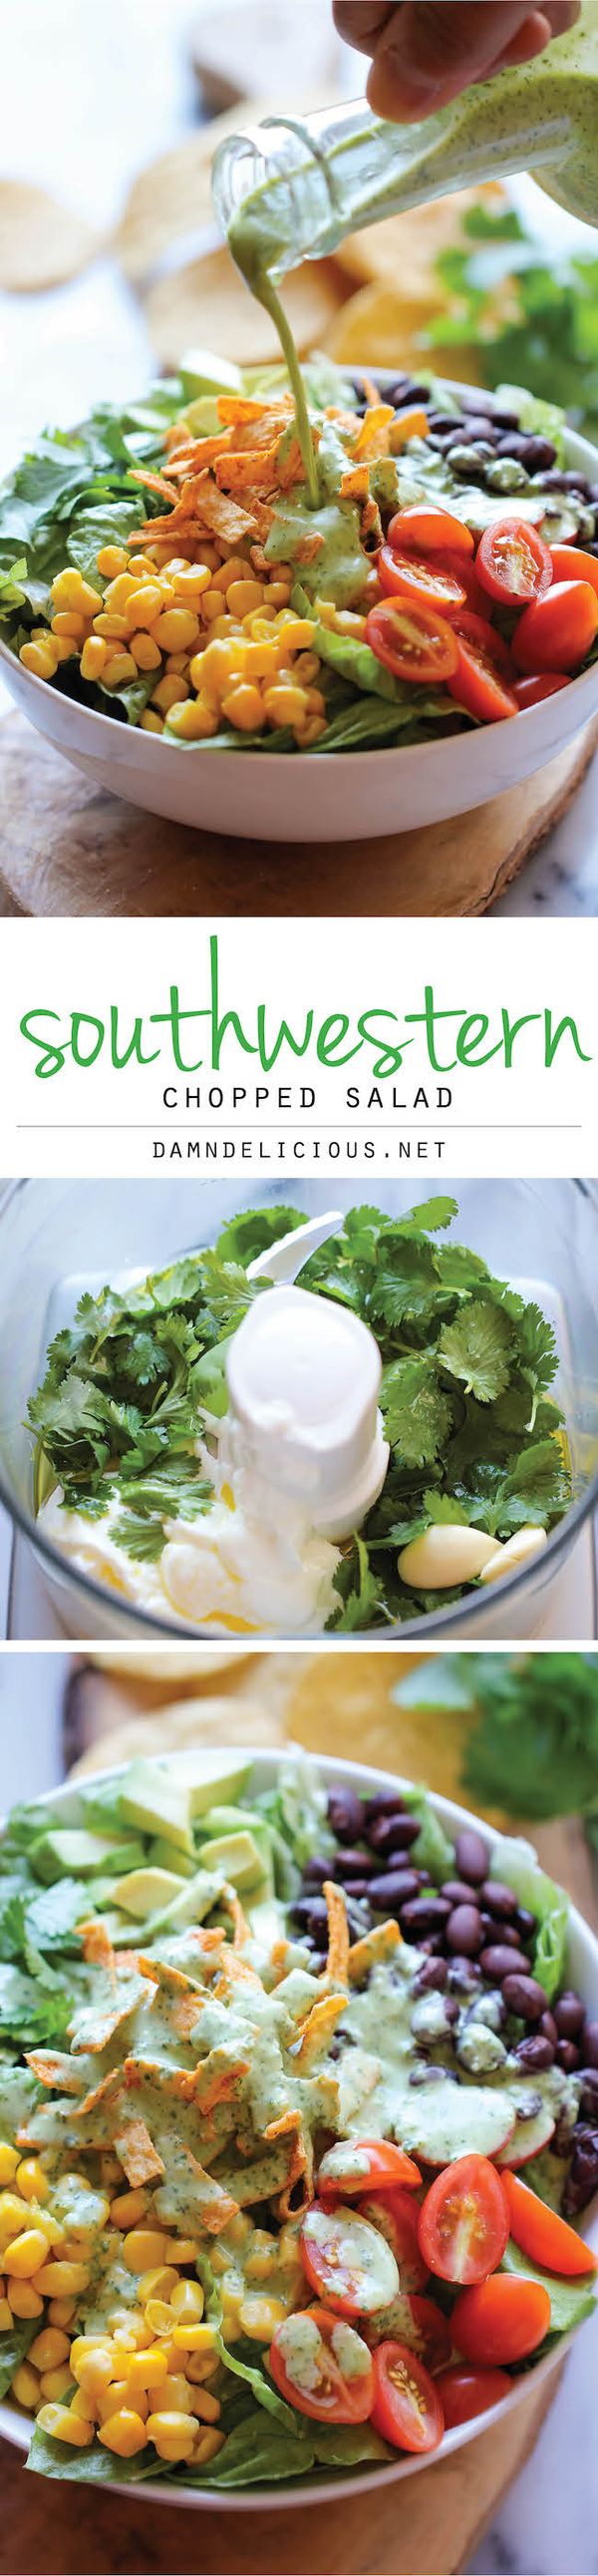 Southwestern Chopped Salad with Cilantro Lime Dressing